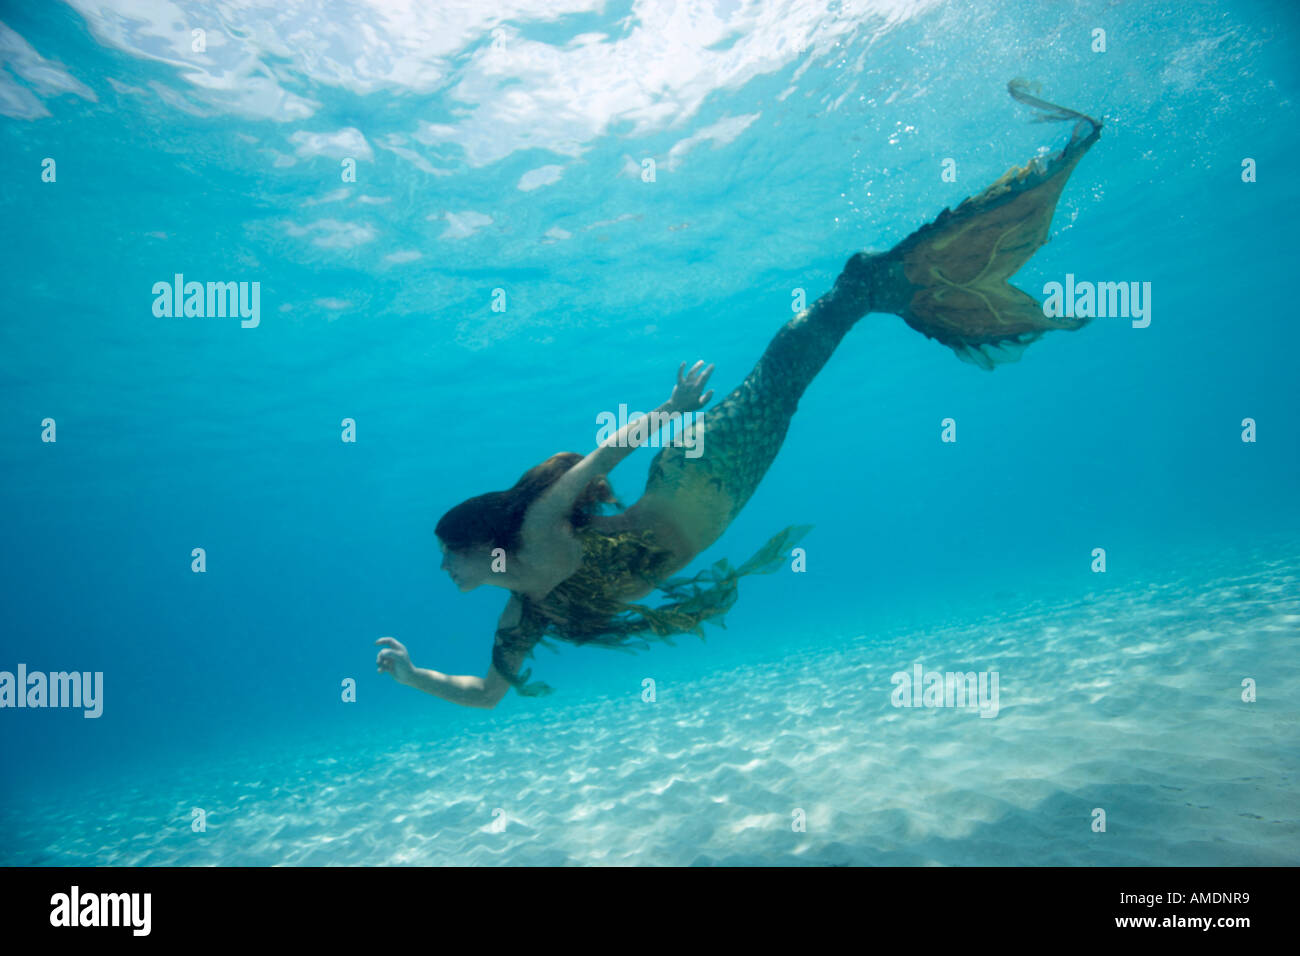 Mermaid underwater in shallow water Playa Palencar west side Cozumel Mexico Stock Photo